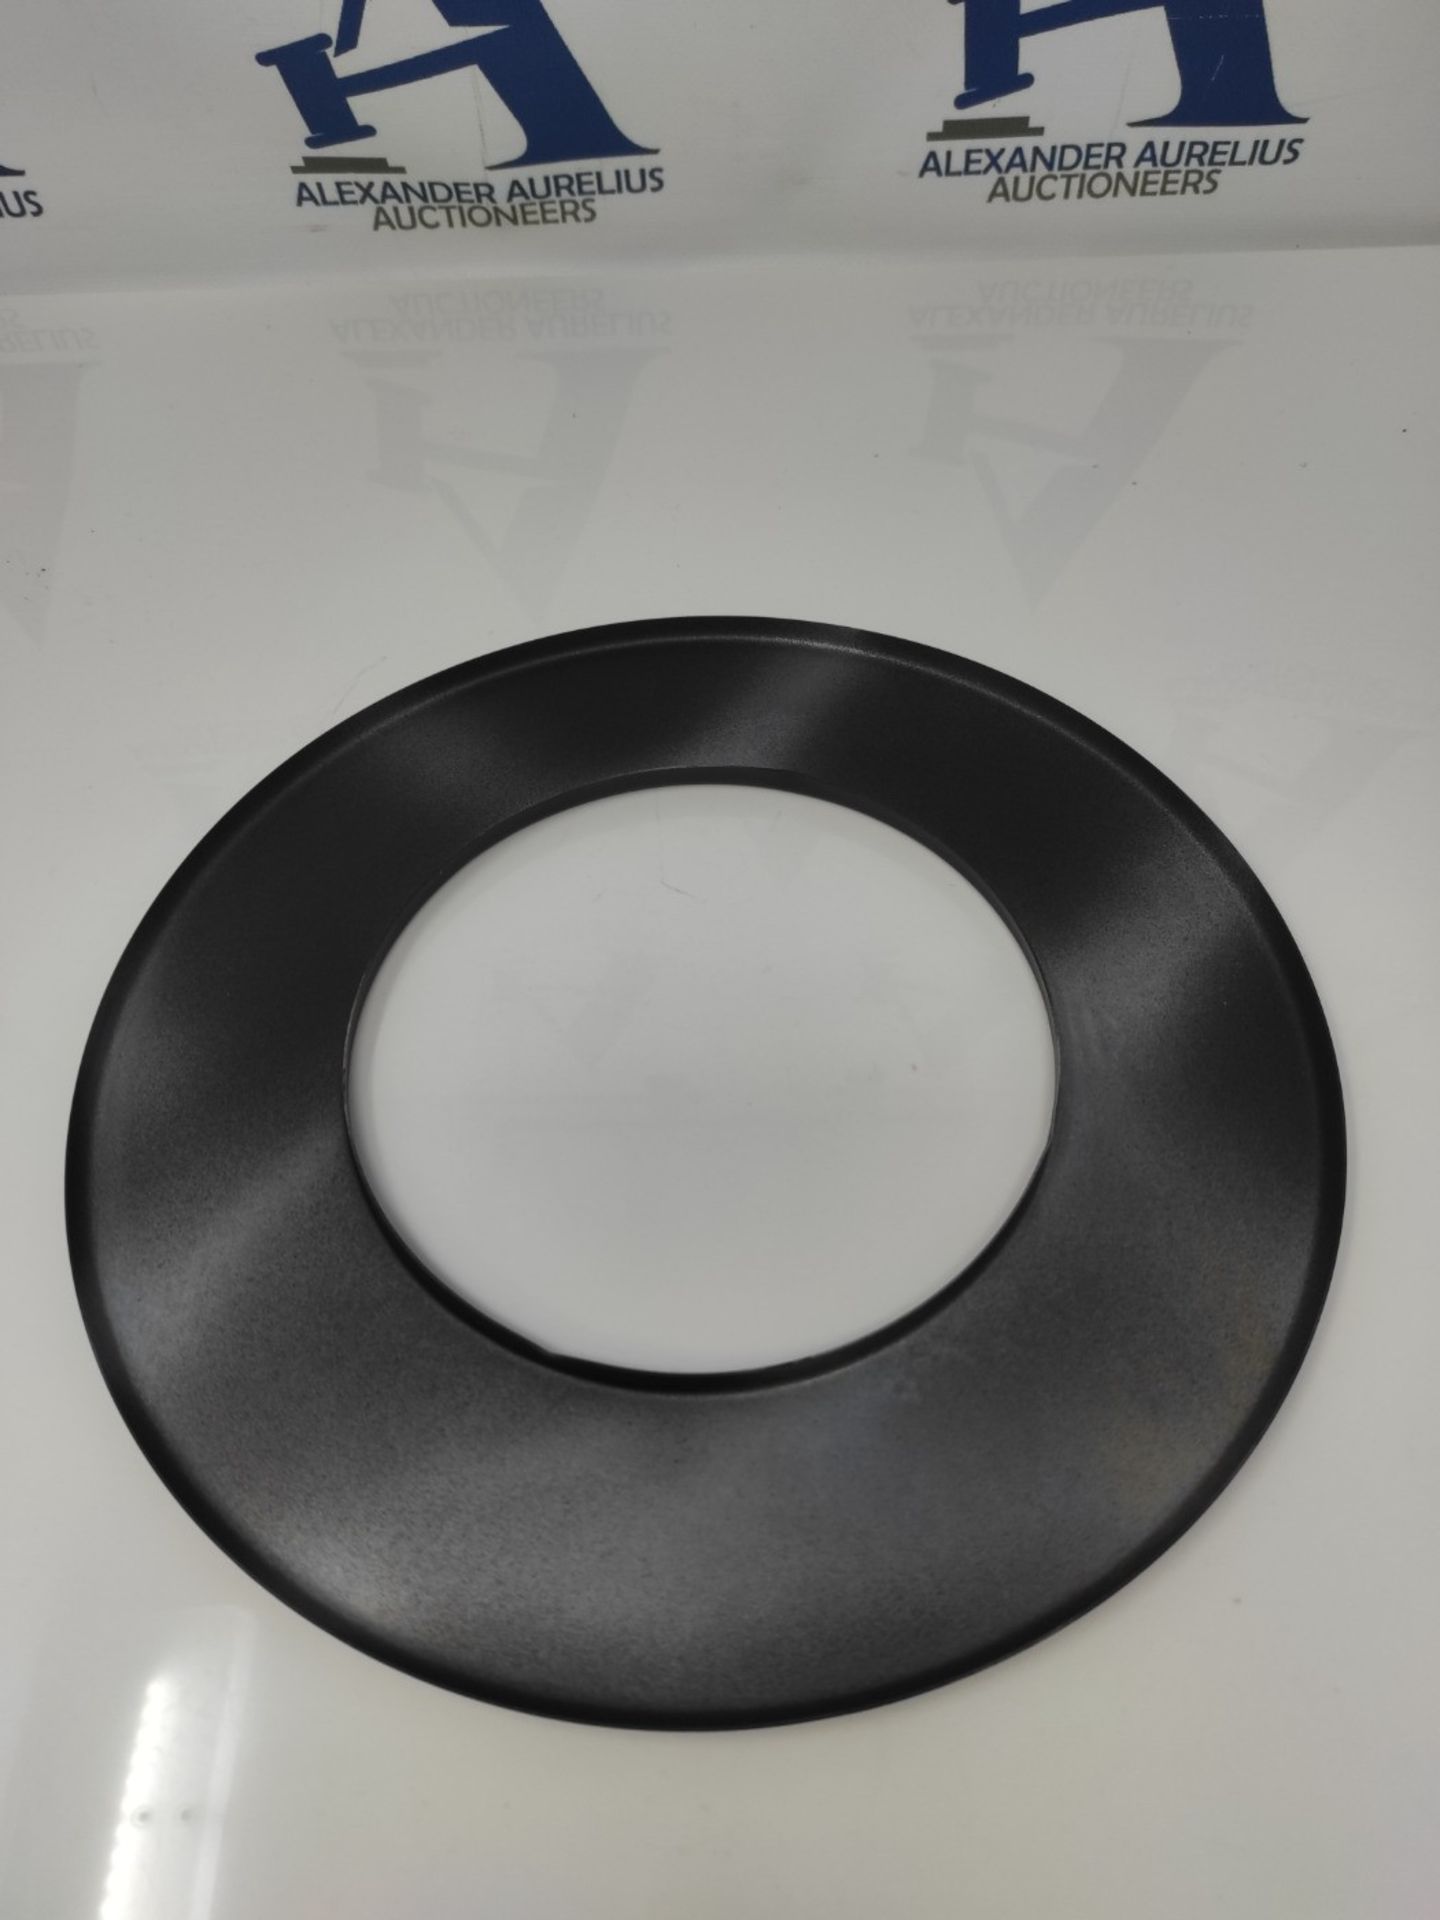 Kamino Flam 331759 Stove Pipe Rosette black, visible panel made of steel, chimney rose - Image 3 of 3